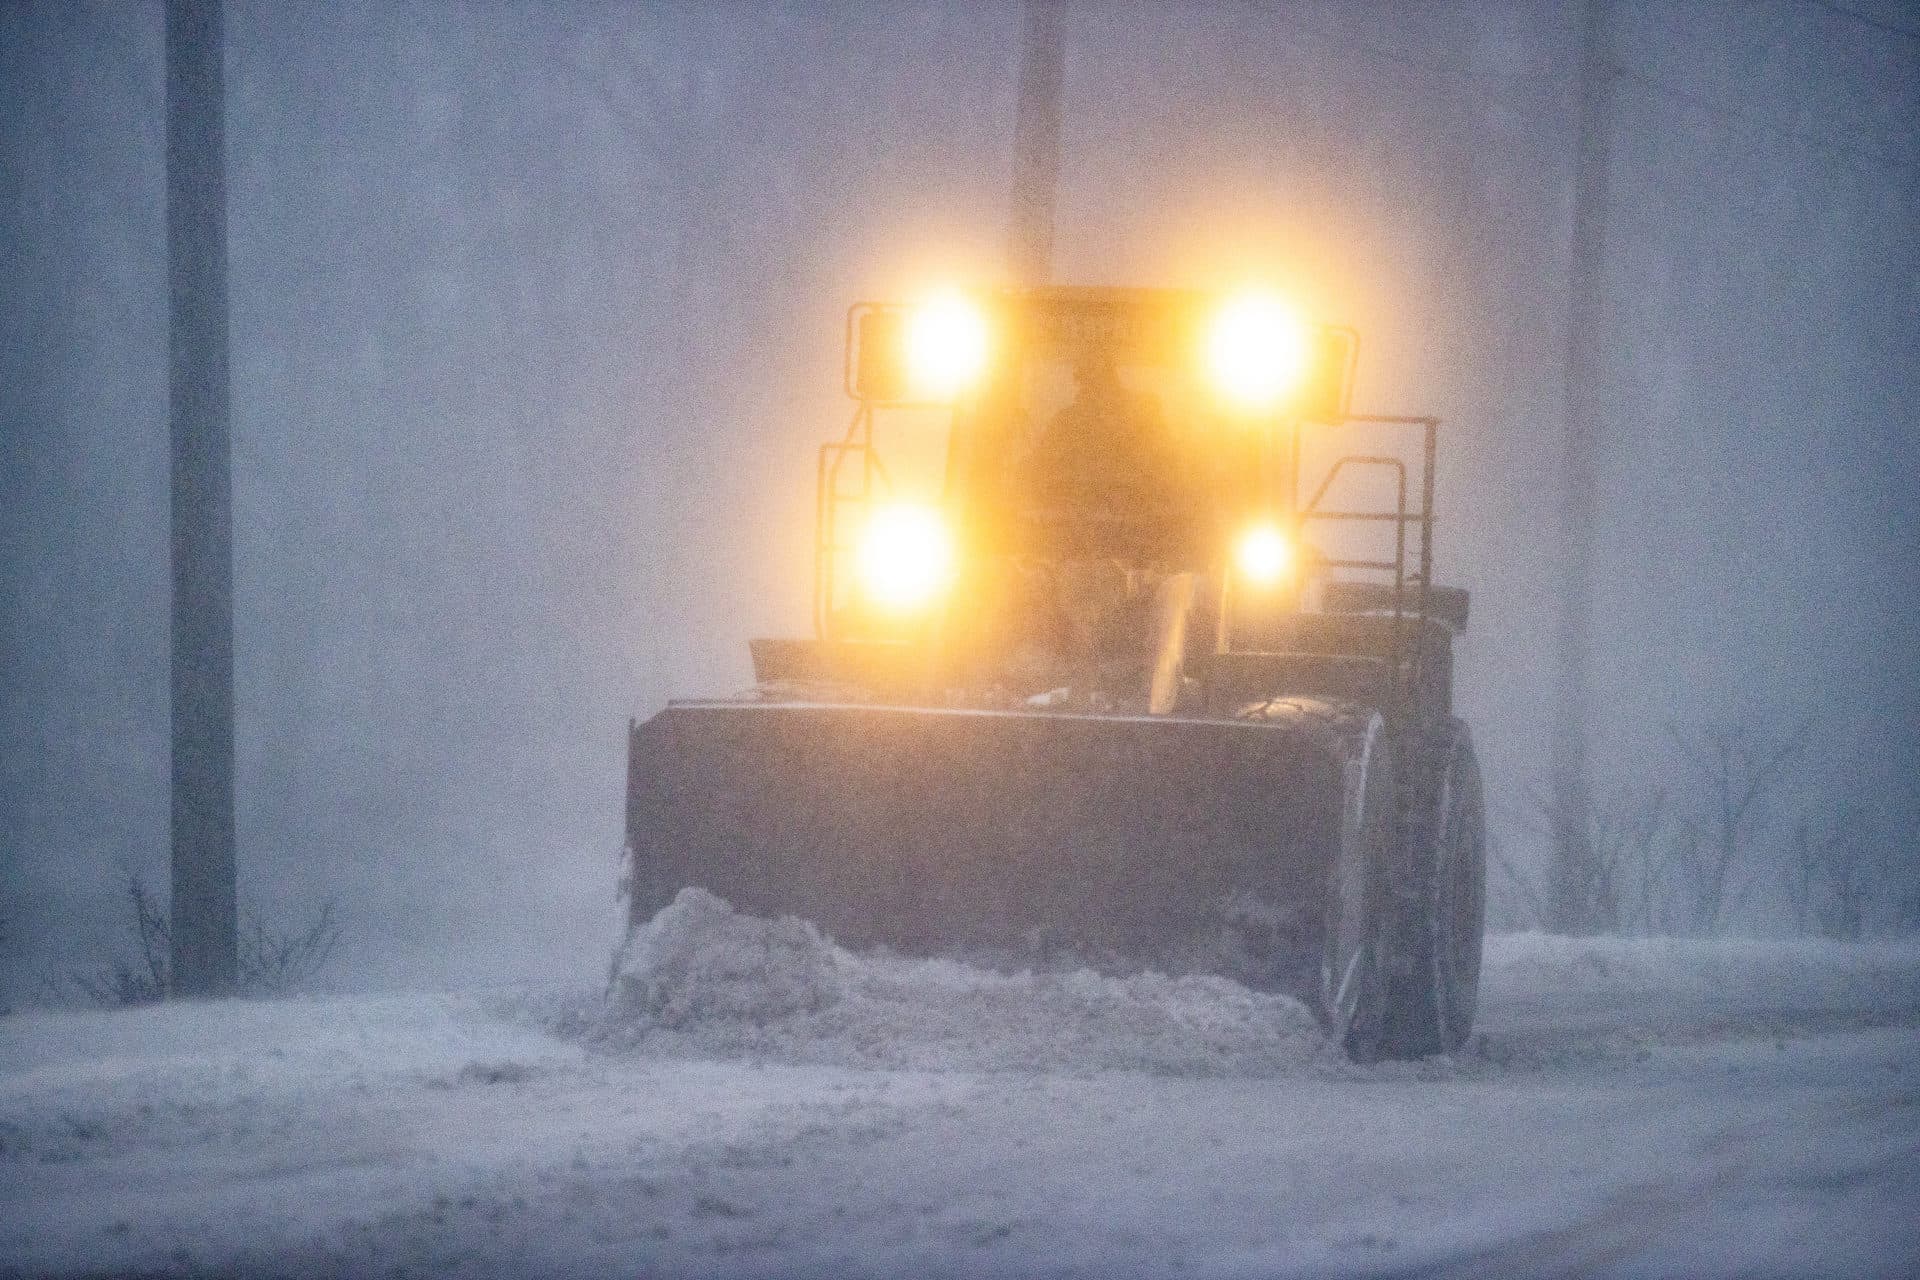 A plow moves snow in whiteout conditions on East Squantum Street in Quincy during the snowstorm Saturday. (Stan Grossfeld/The Boston Globe via Getty Images)